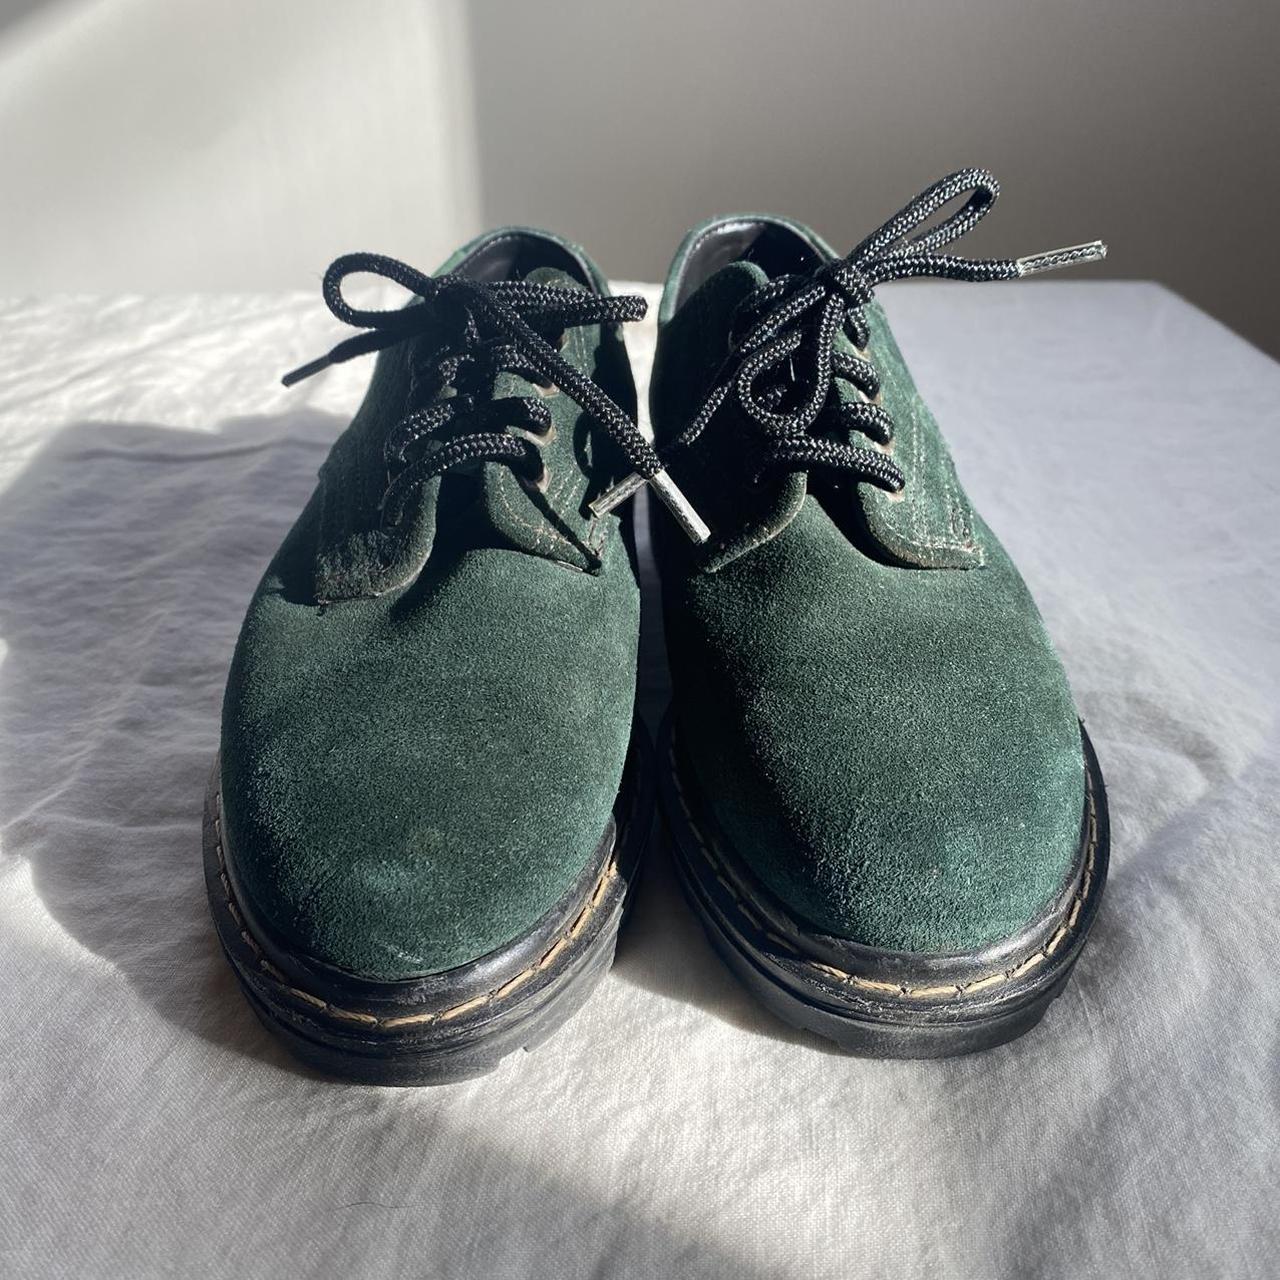 Eastland Women's Green and Black Oxfords (2)